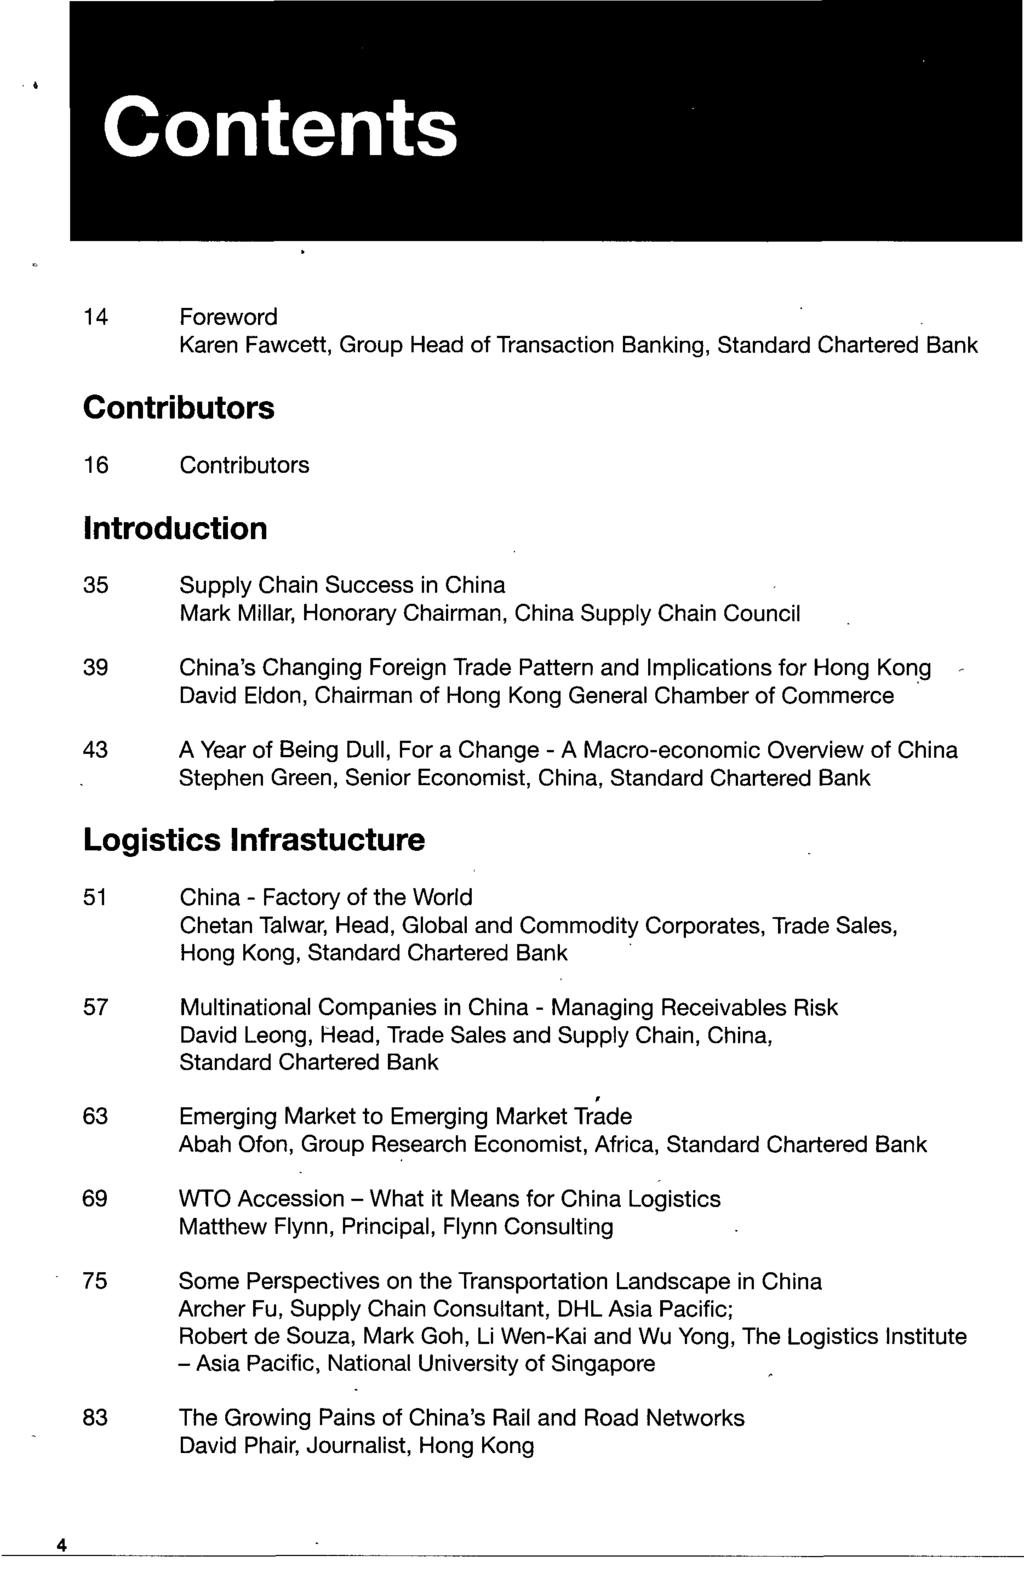 Contents 14 Foreword Karen Fawcett, Group Head of Transaction Banking, Contributors 16 Contributors Introduction 35 Supply Chain Success in China Mark Millar, Honorary Chairman, China Supply Chain